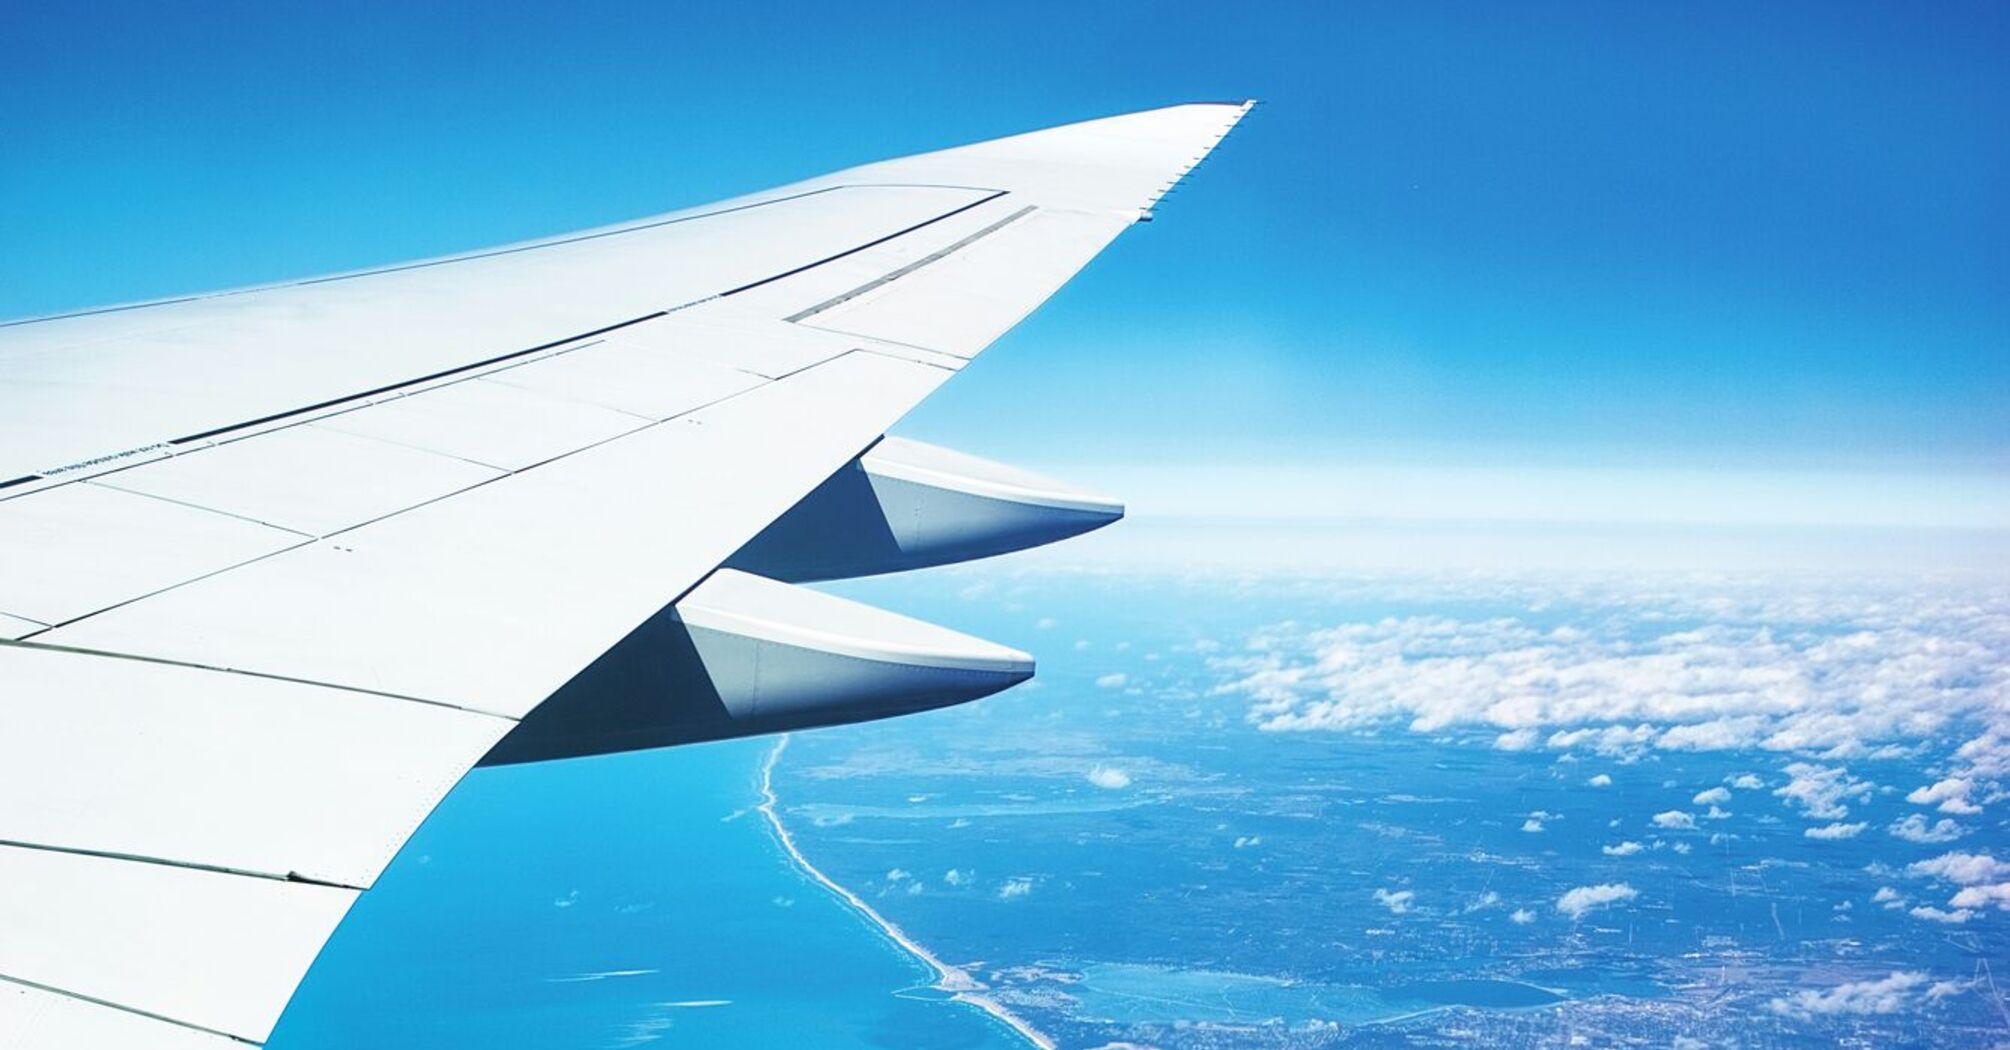 The photo shows an airplane wing viewed from the window during flight